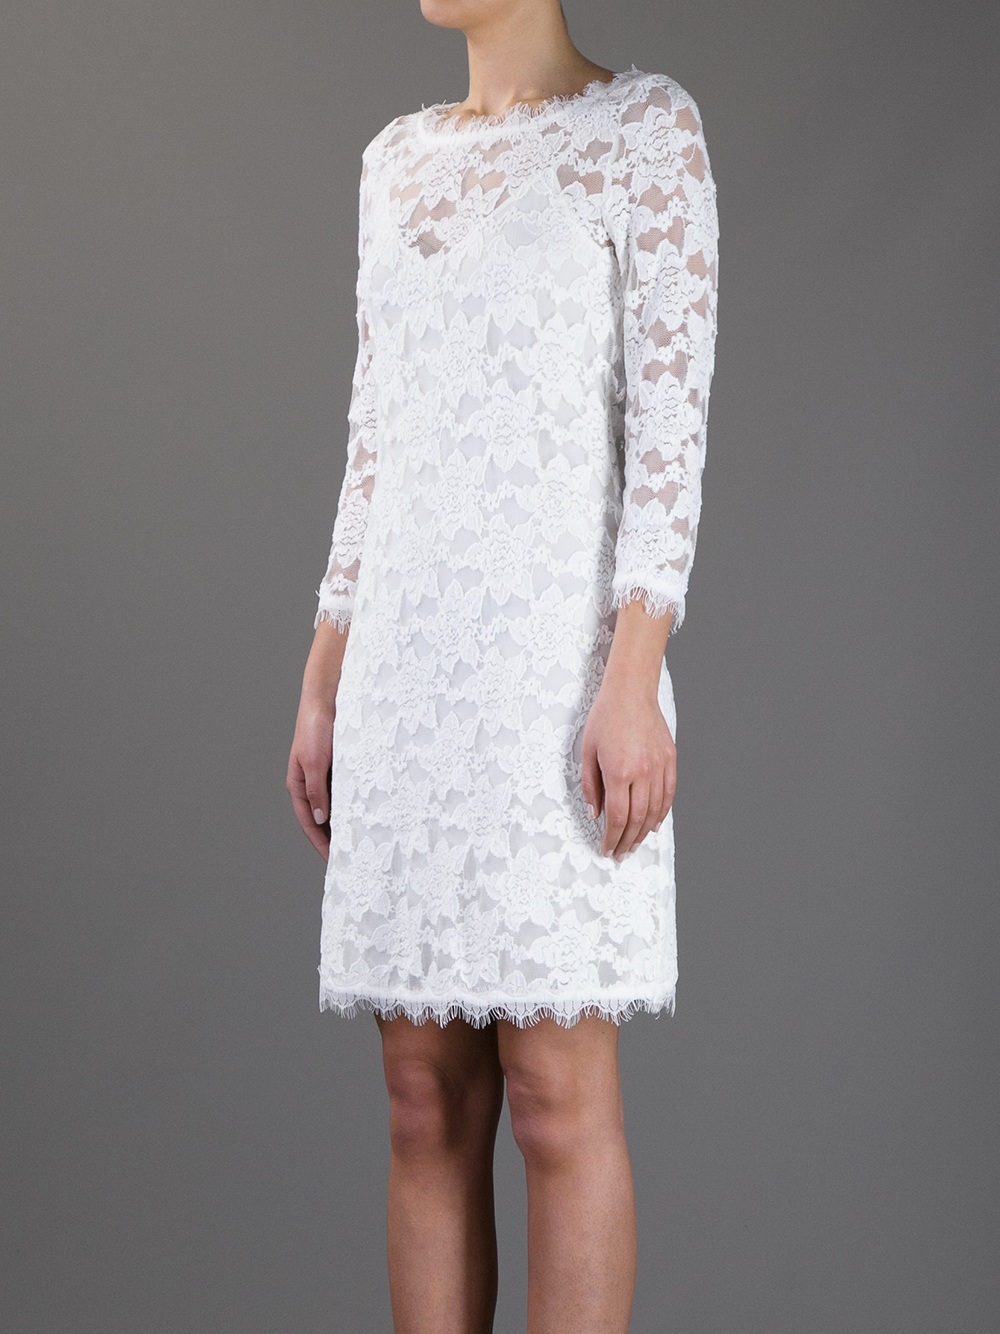 Rebecca taylor Lace Shift Dress in White | Lyst